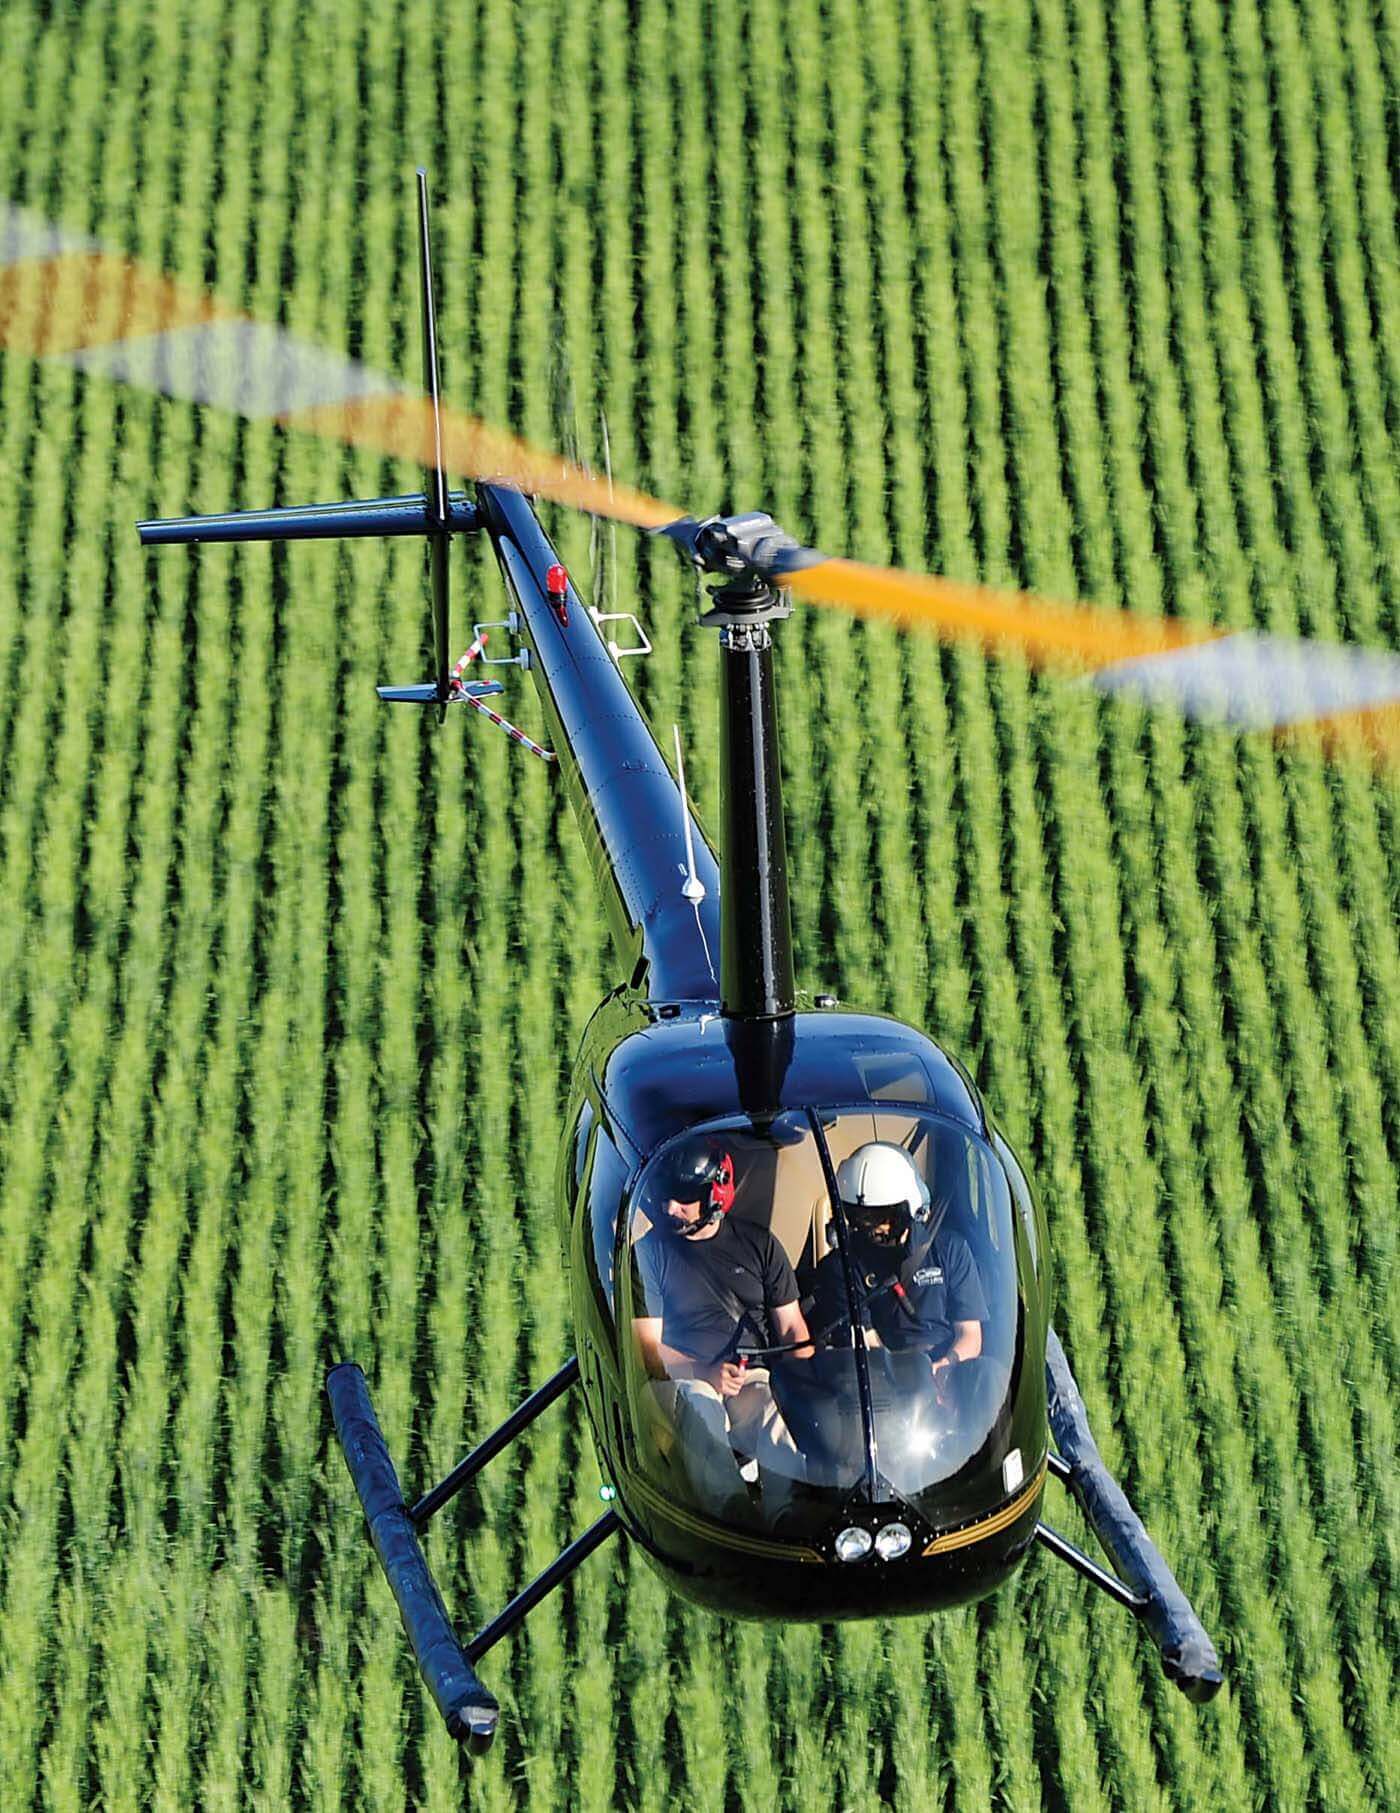 Robinson R22, R44, and R66 helicopters have accumulated over 30 million flight hours